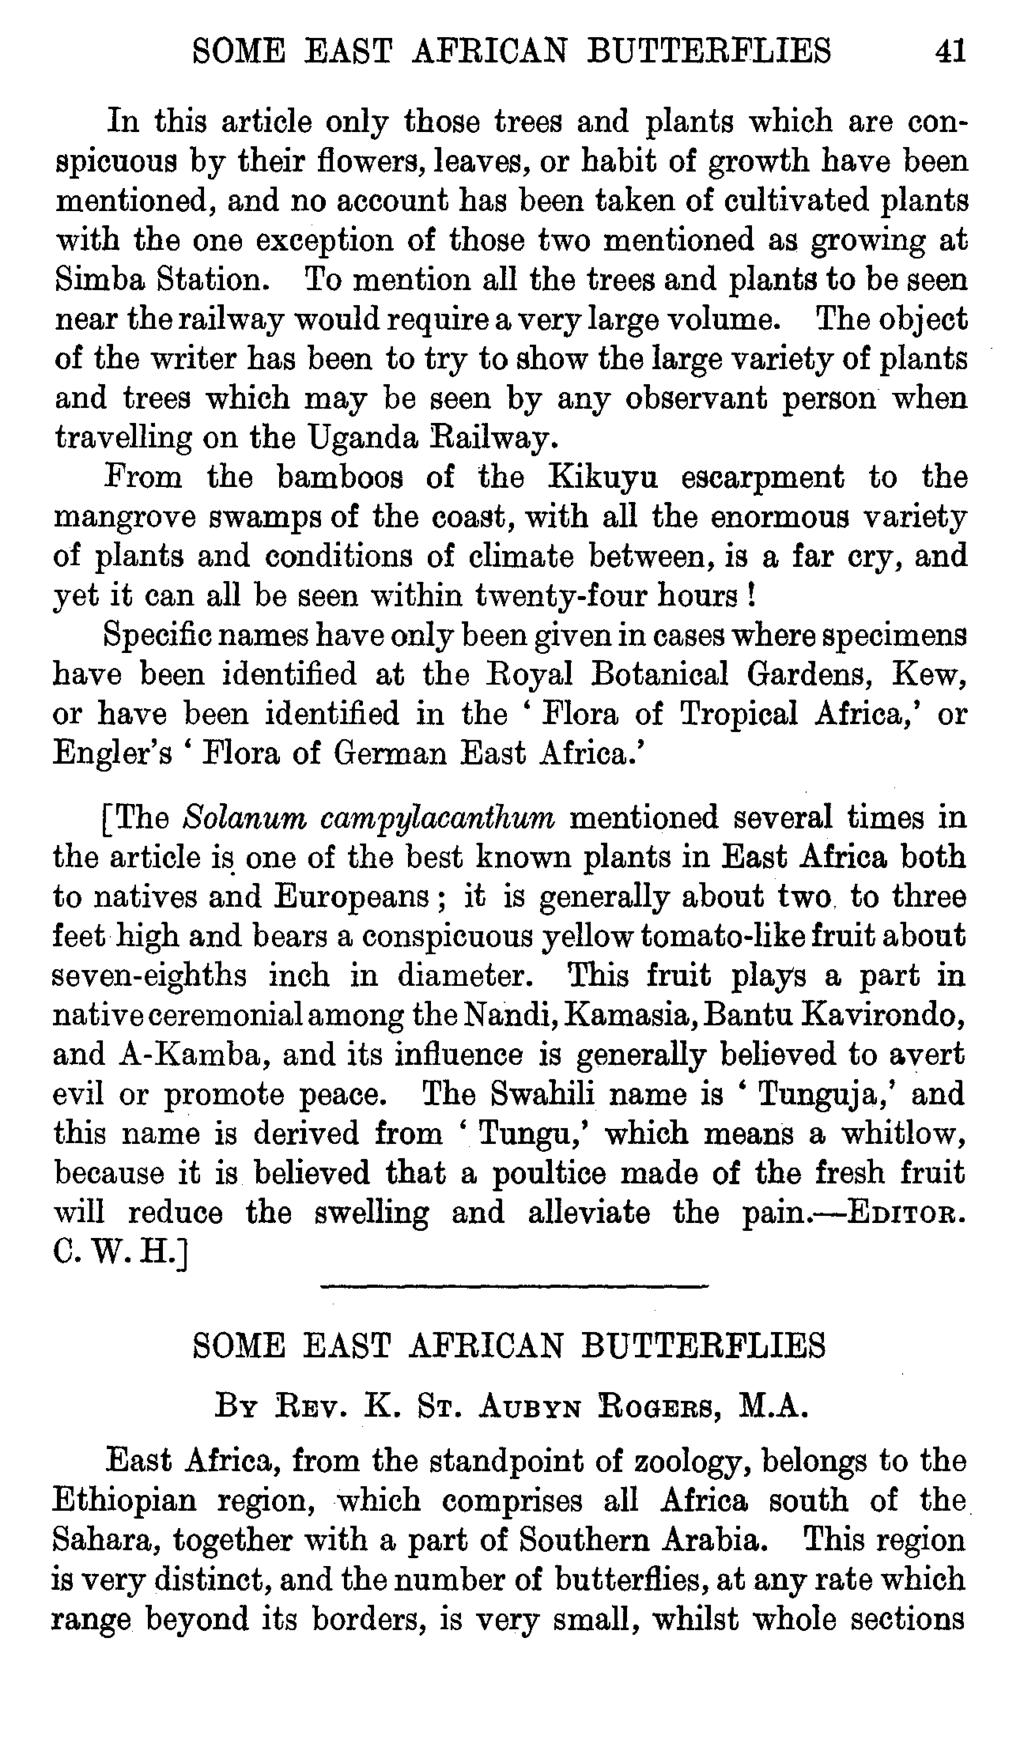 SOME EAST AFRICAN BUTTERFLIES 41 In this article only those trees and plants which are conspicuous by their flowers, leaves, or habit of growth have been mentioned, and no account has been taken of